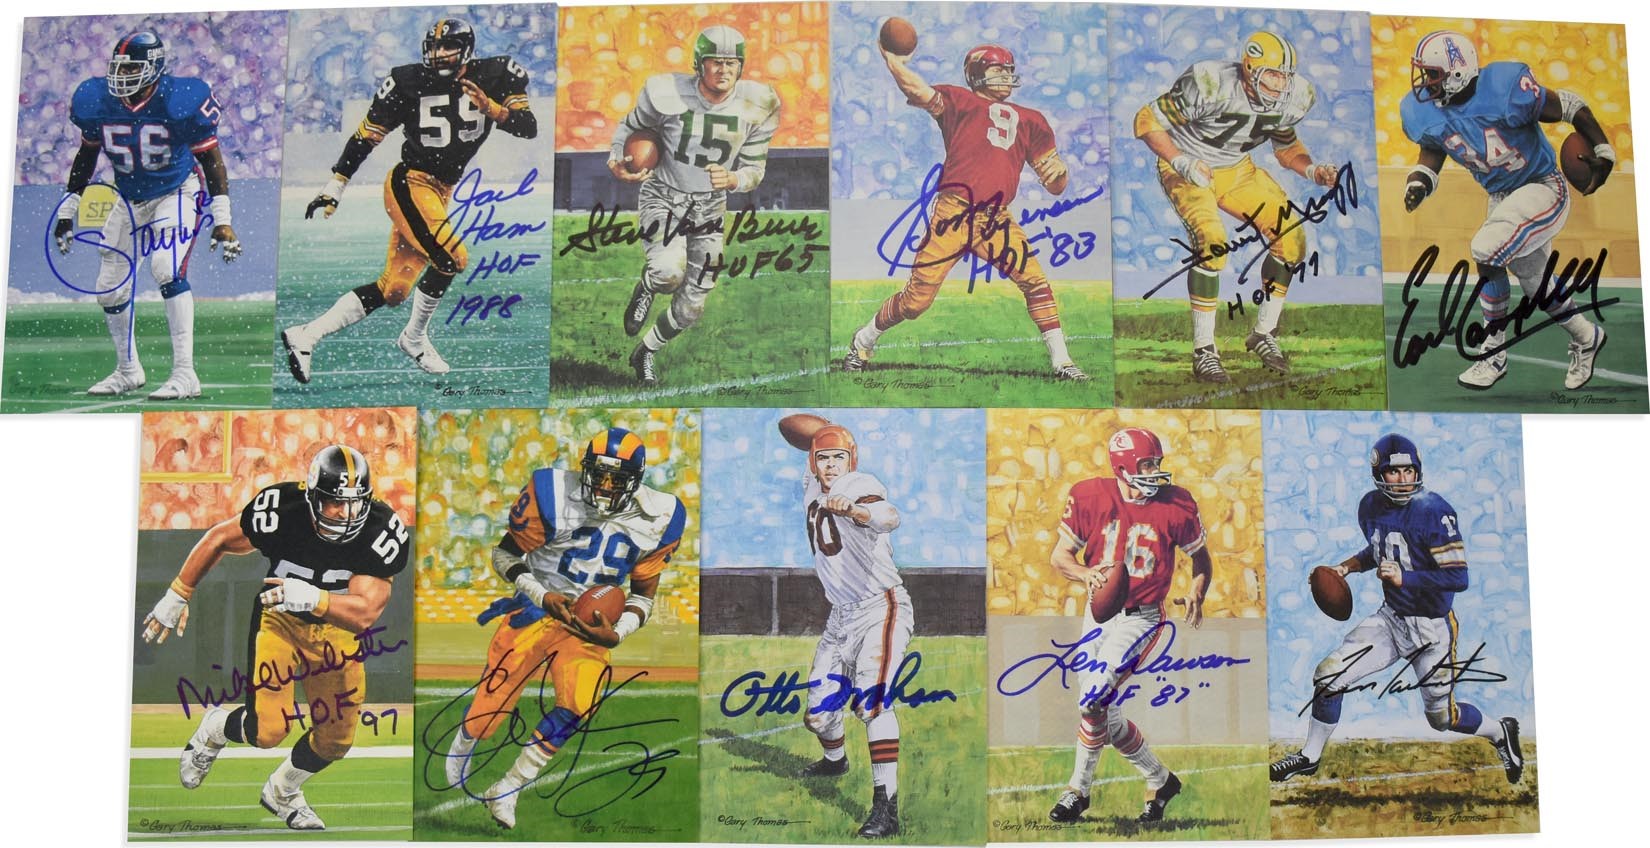 Football - 1989-2015 Hall of Fame Goal Line Art Complete & Near-Complete Sets Collection - 140+ Signed (360+ Total)